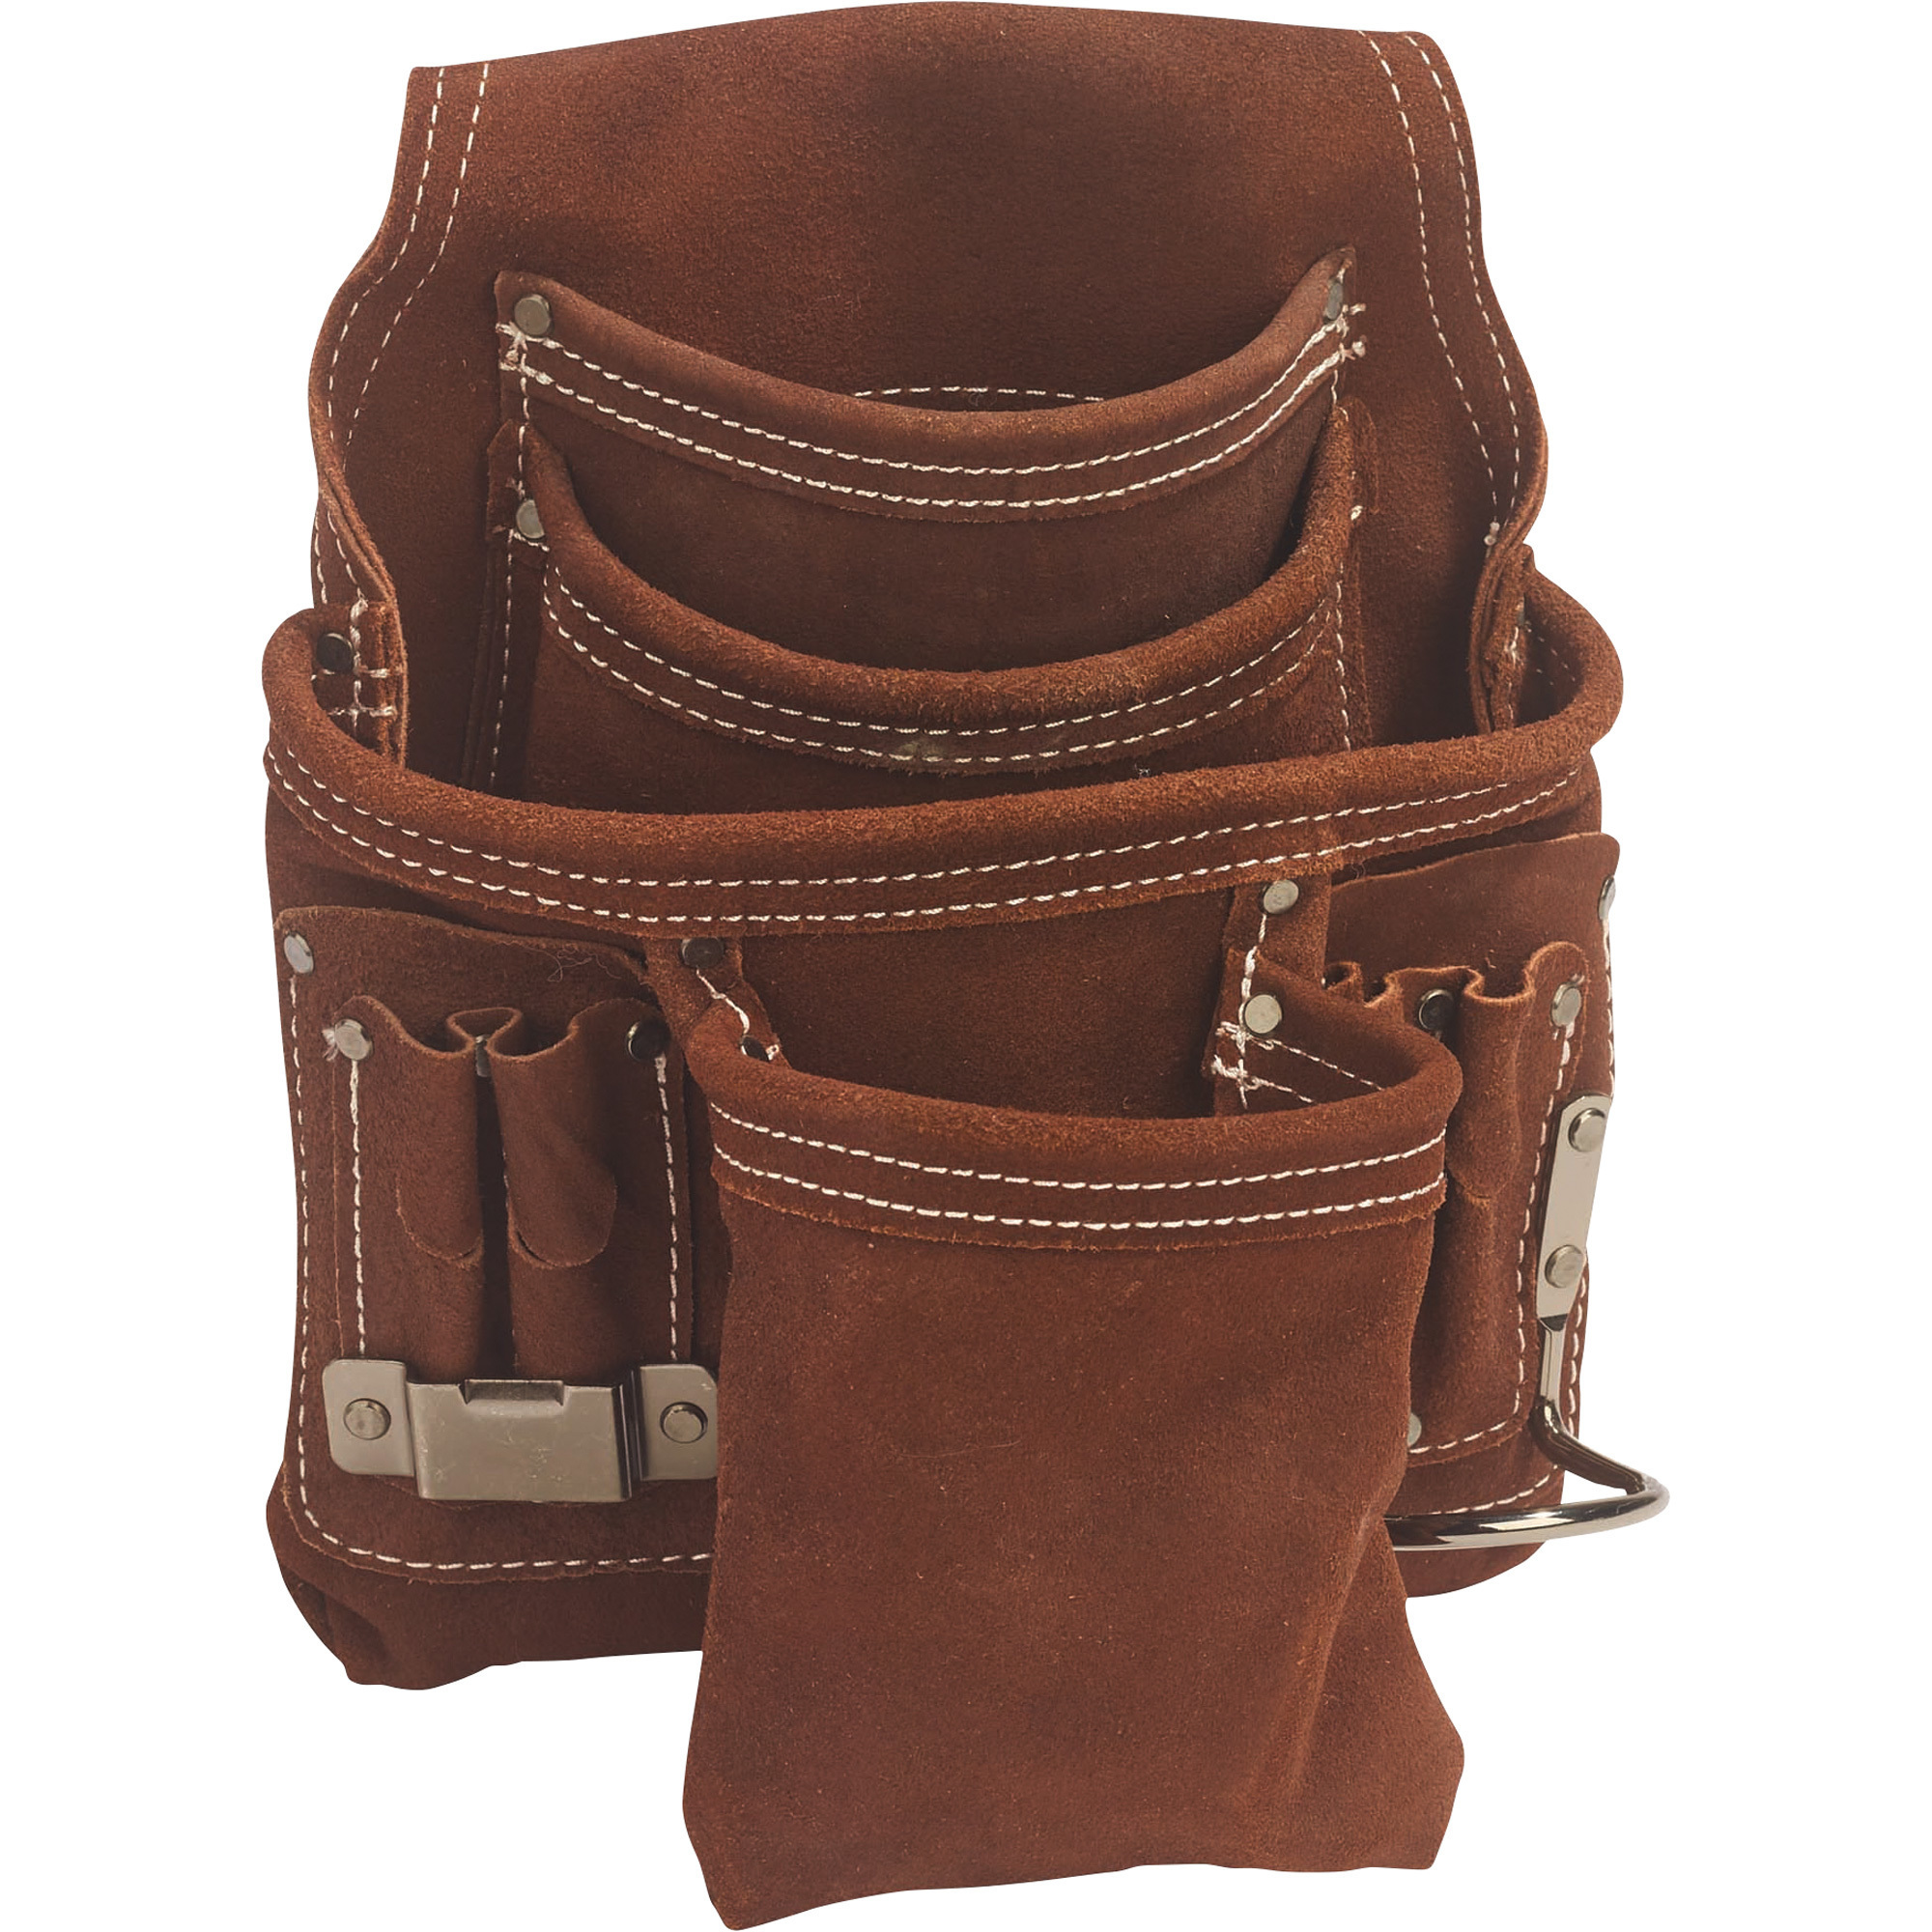 BUCKET BOSS 10 Pocket Suede Leather Work Tool Belt Pouch with